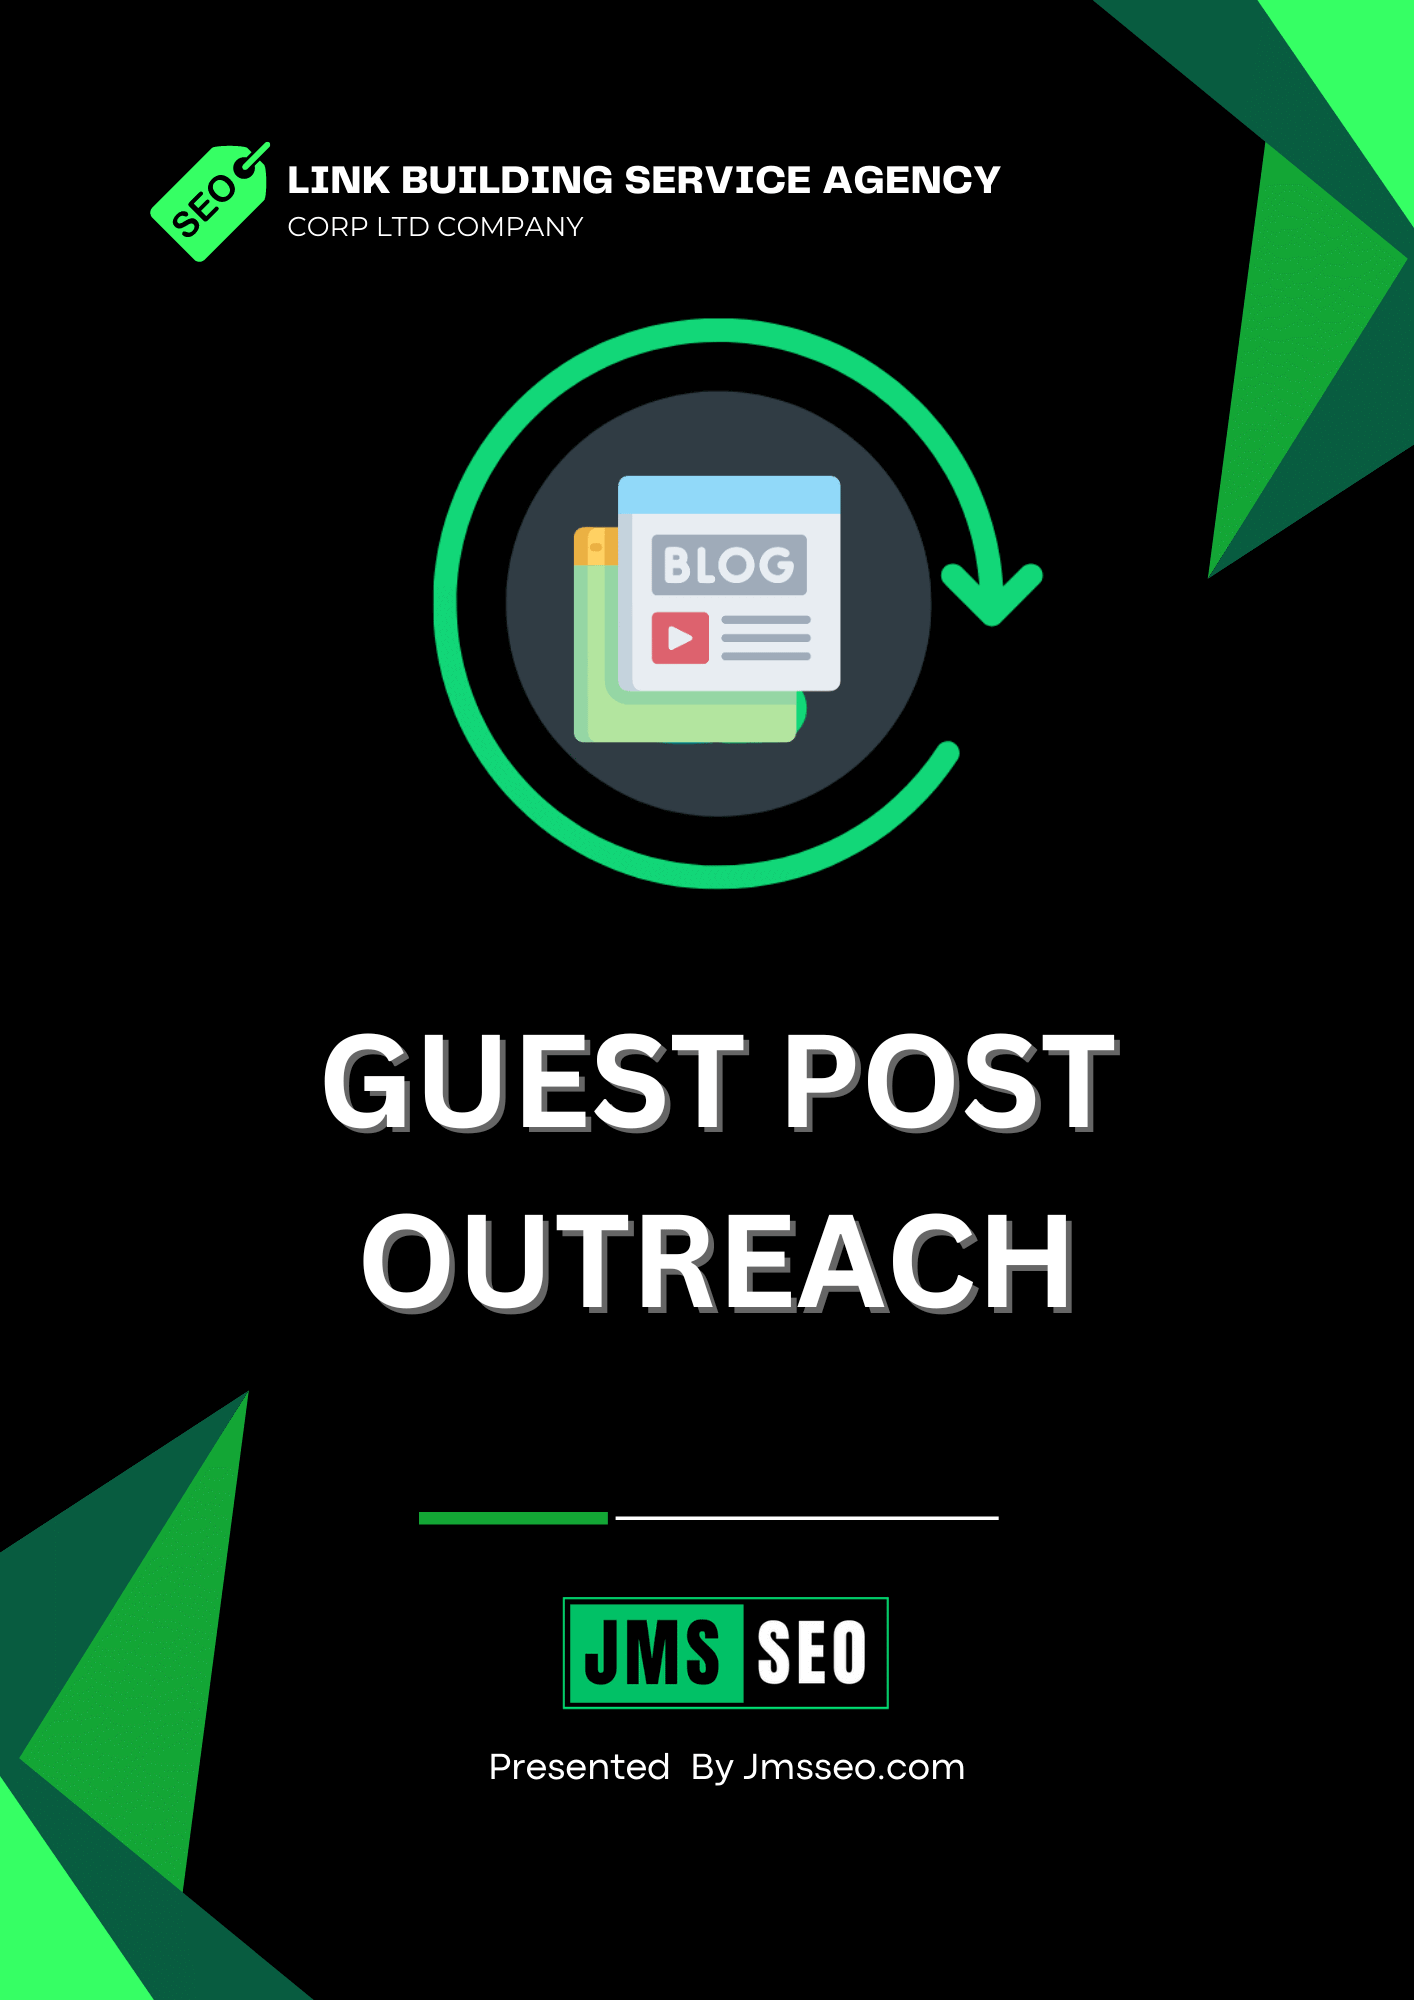 Guest post outreach